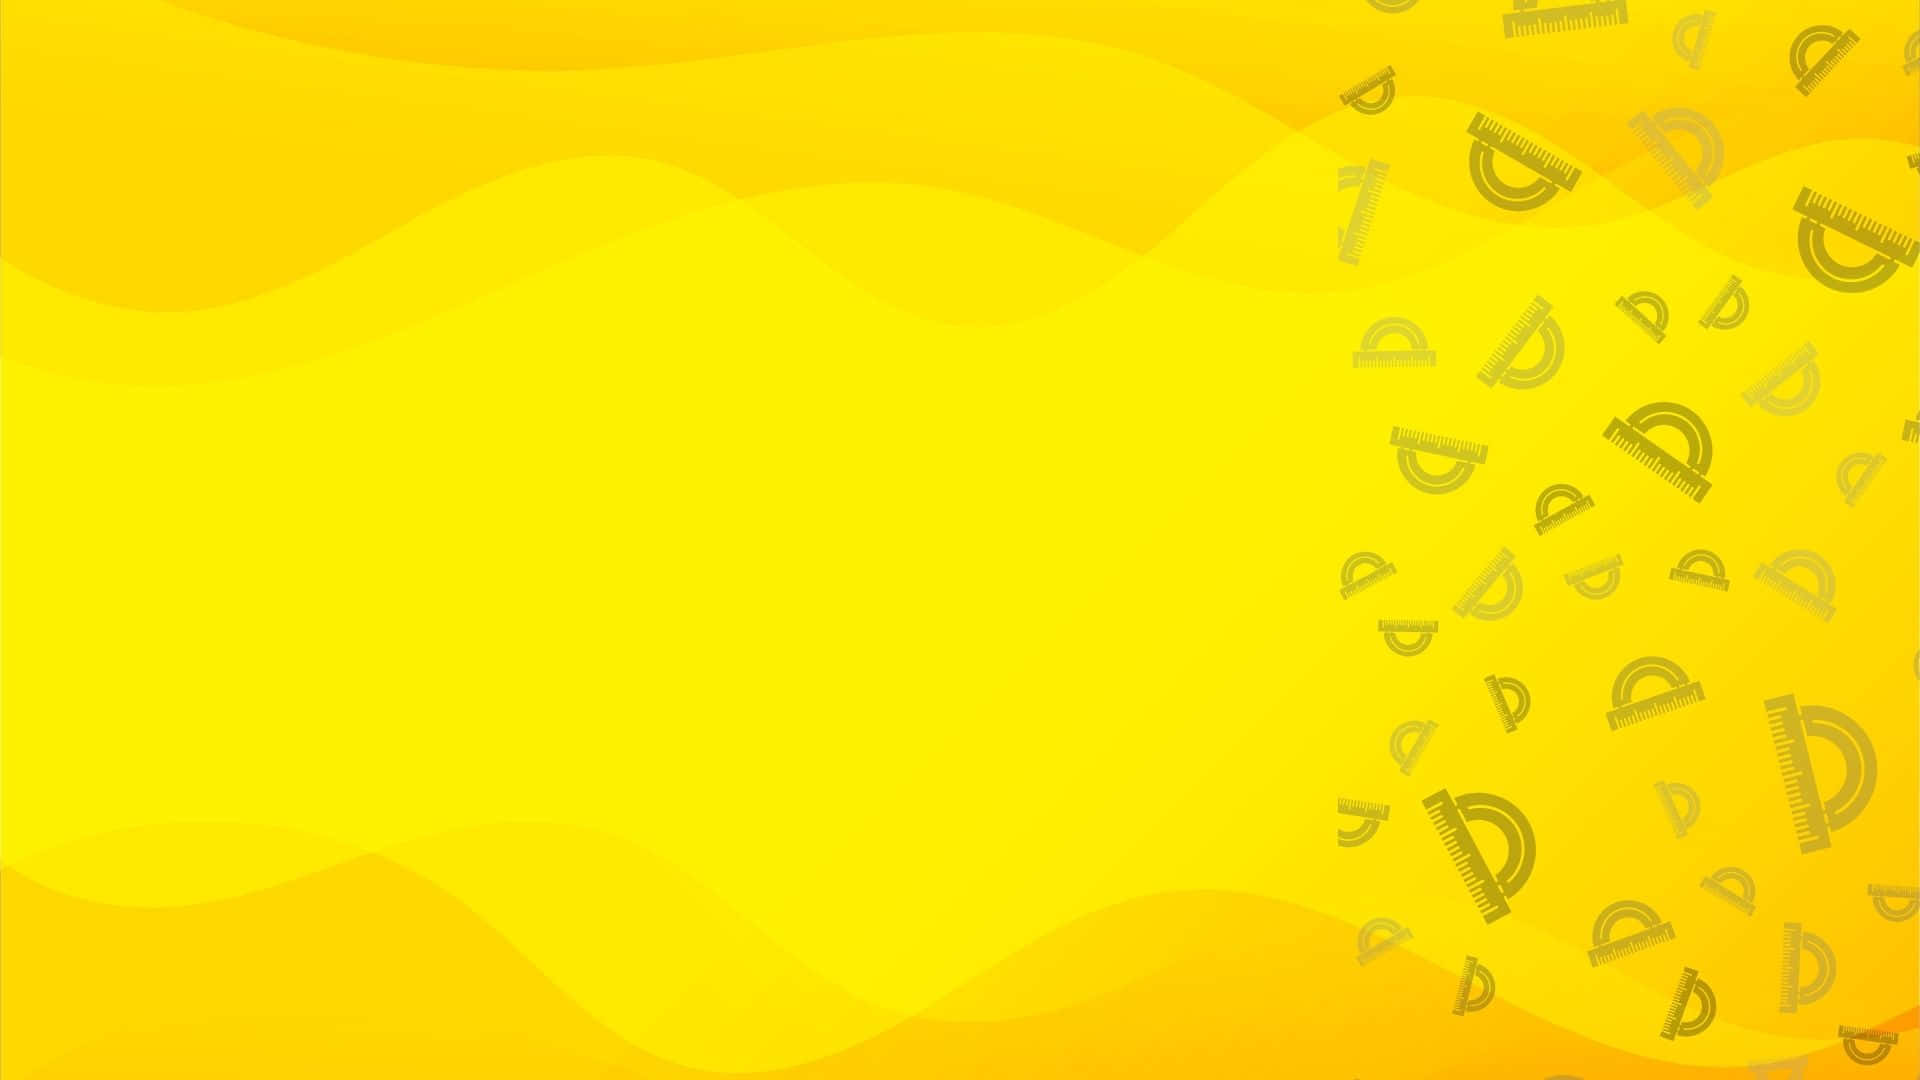 Brighten up your day with this cheerful yellow aesthetic background.